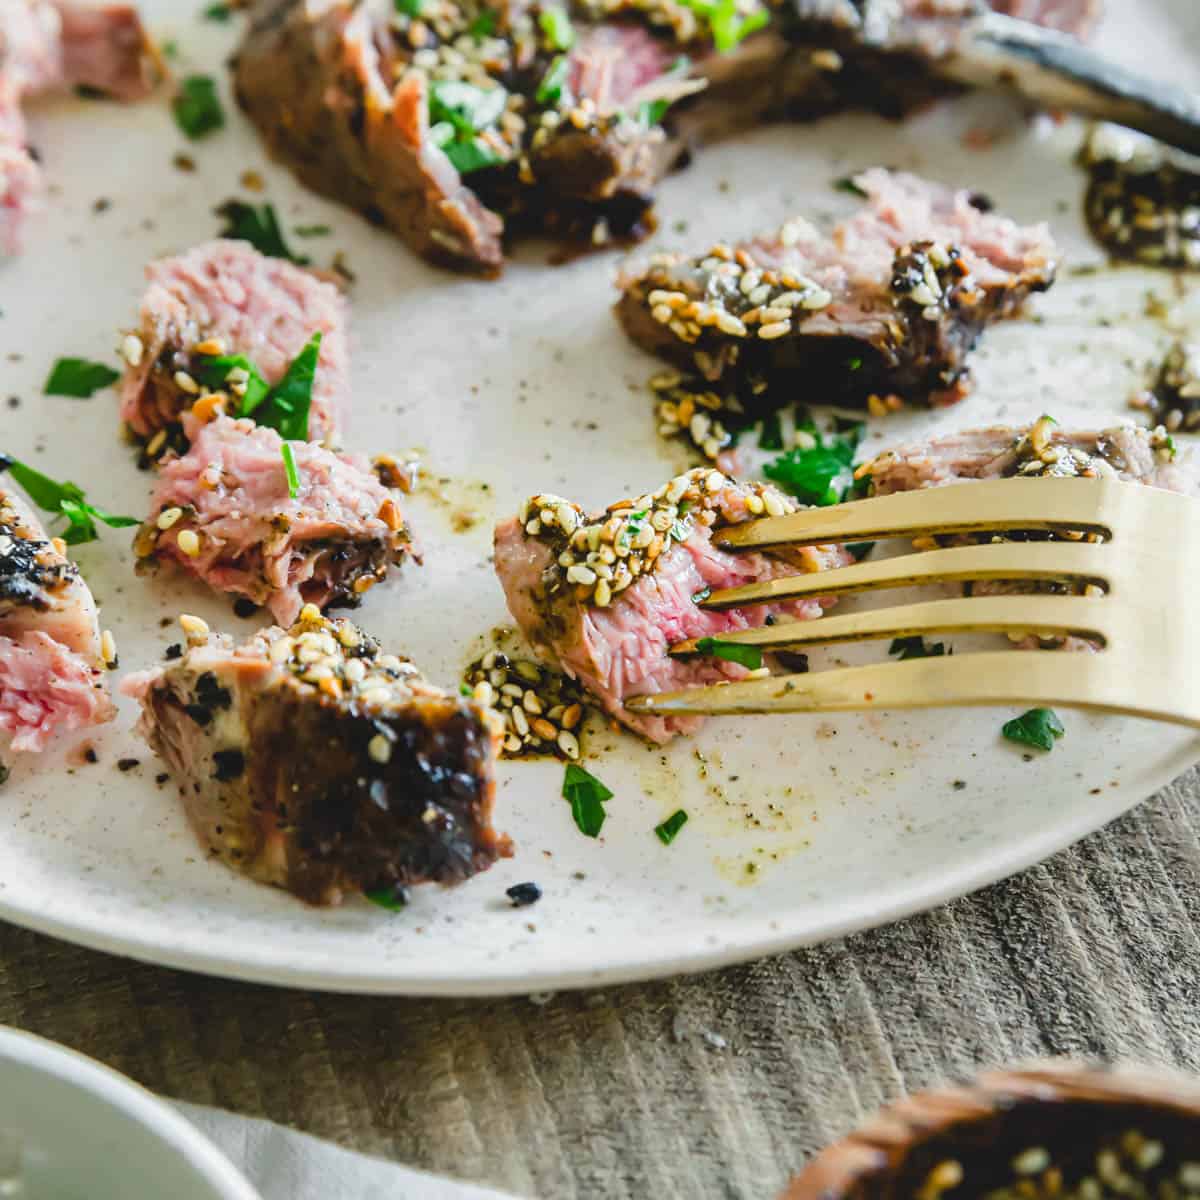 Cut up za'atar spiced grilled lamb chop on a plate with a fork.